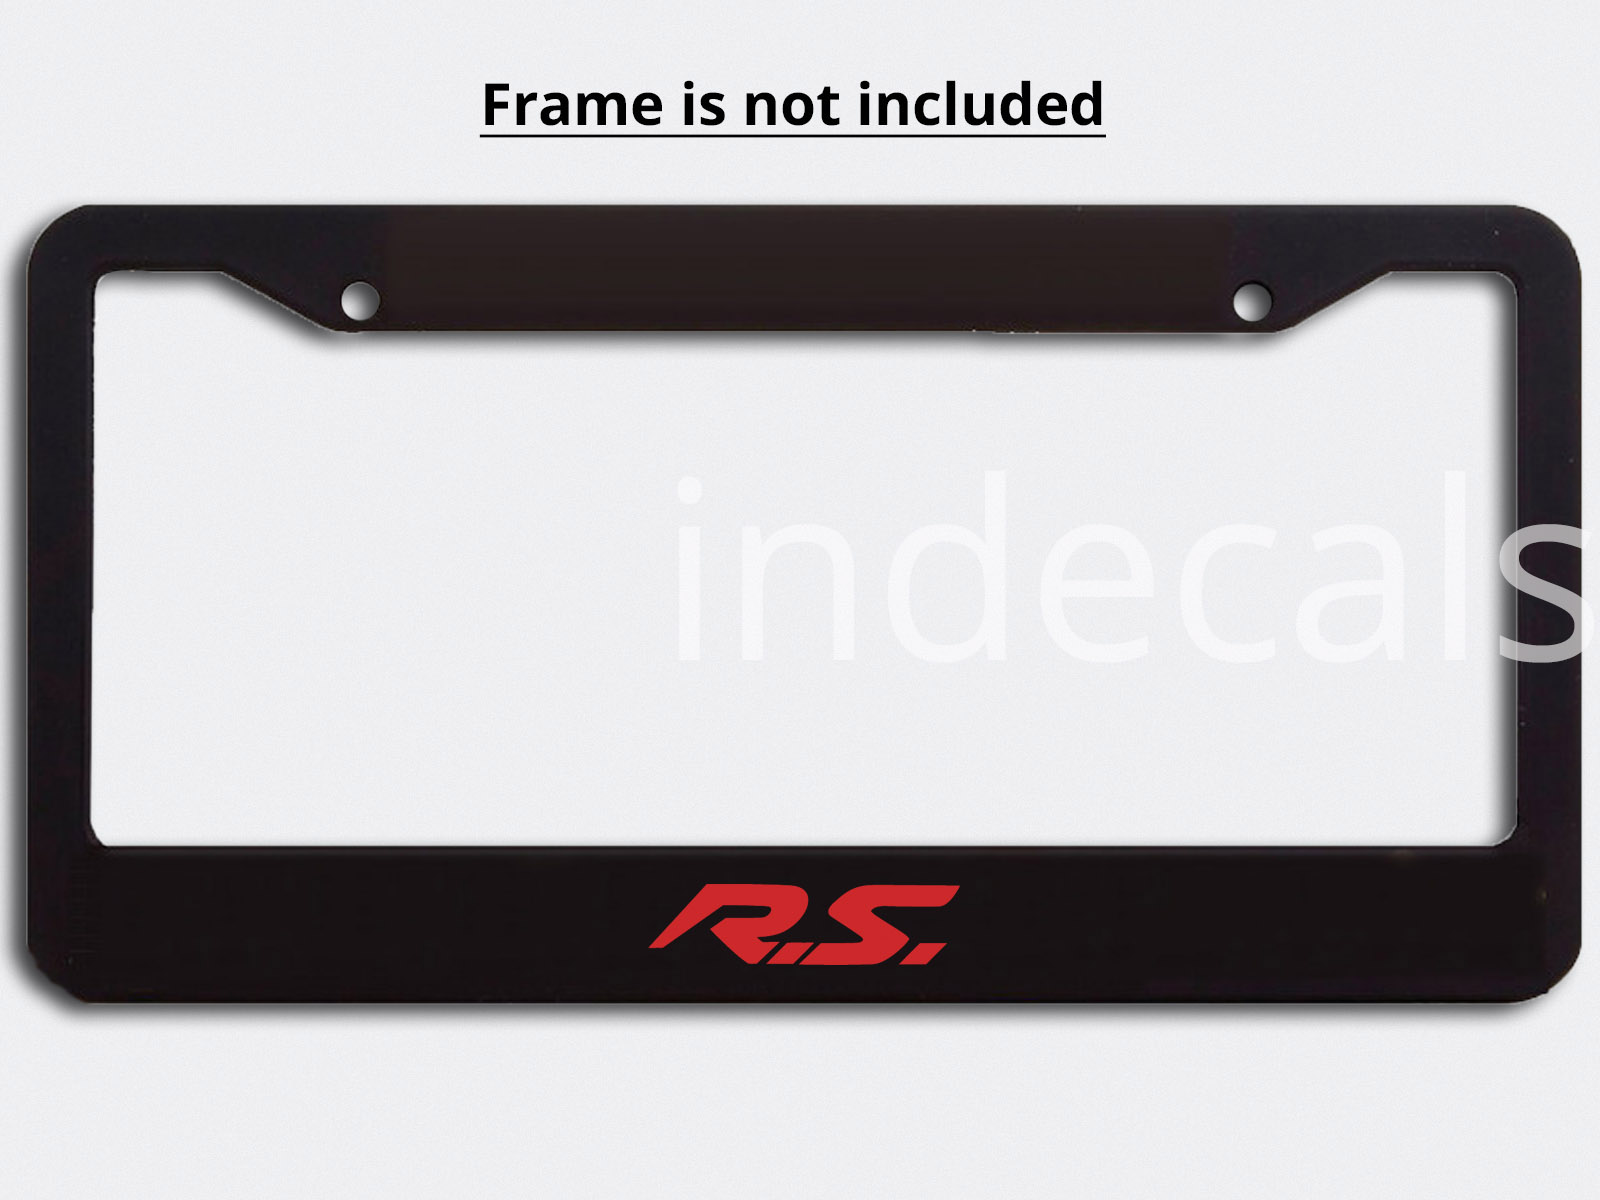 3 x Renault RS Stickers for License Plate Frame - Red